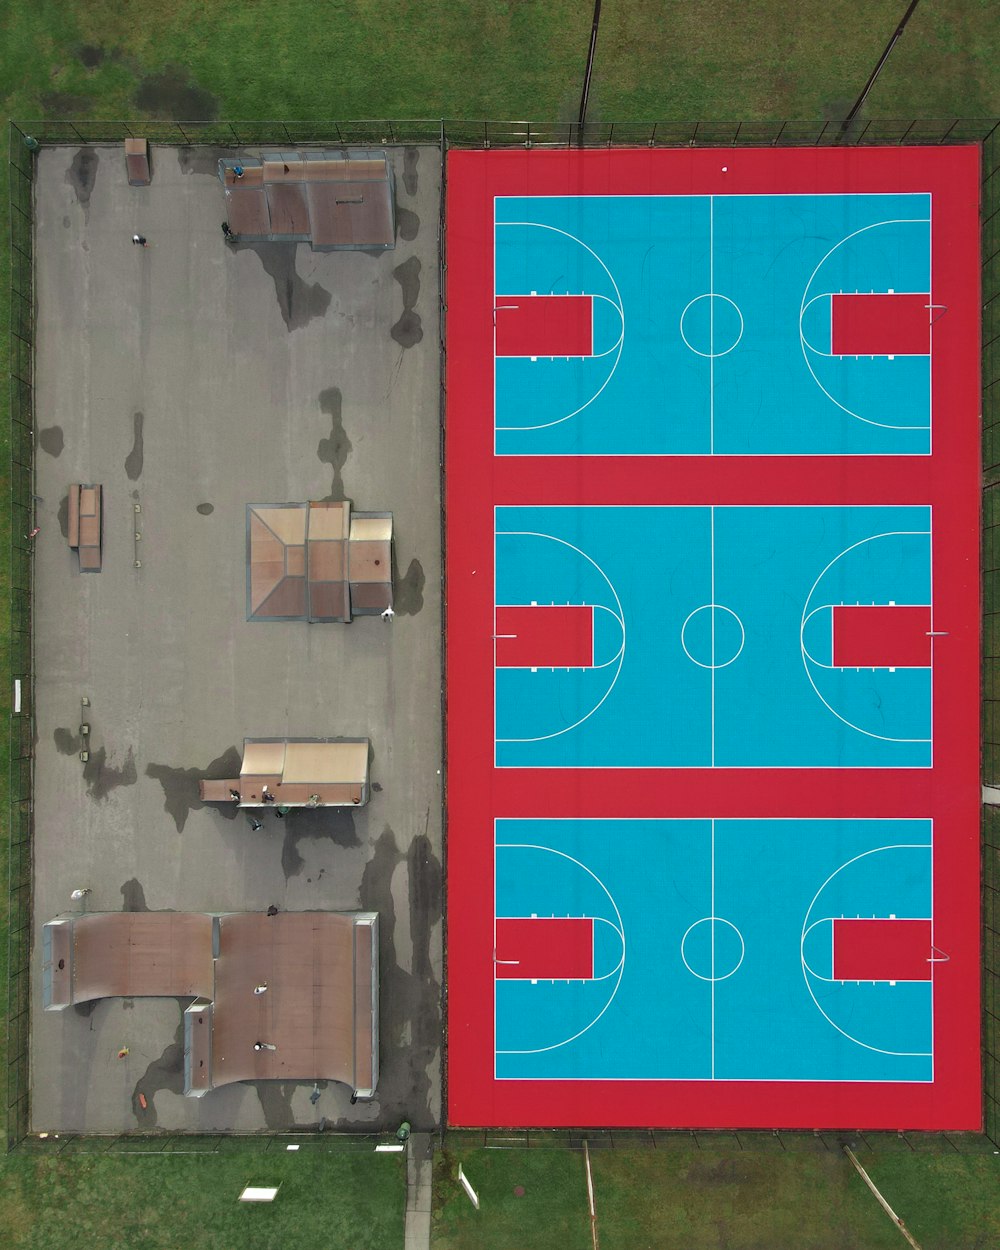 an overhead view of a basketball court in a park